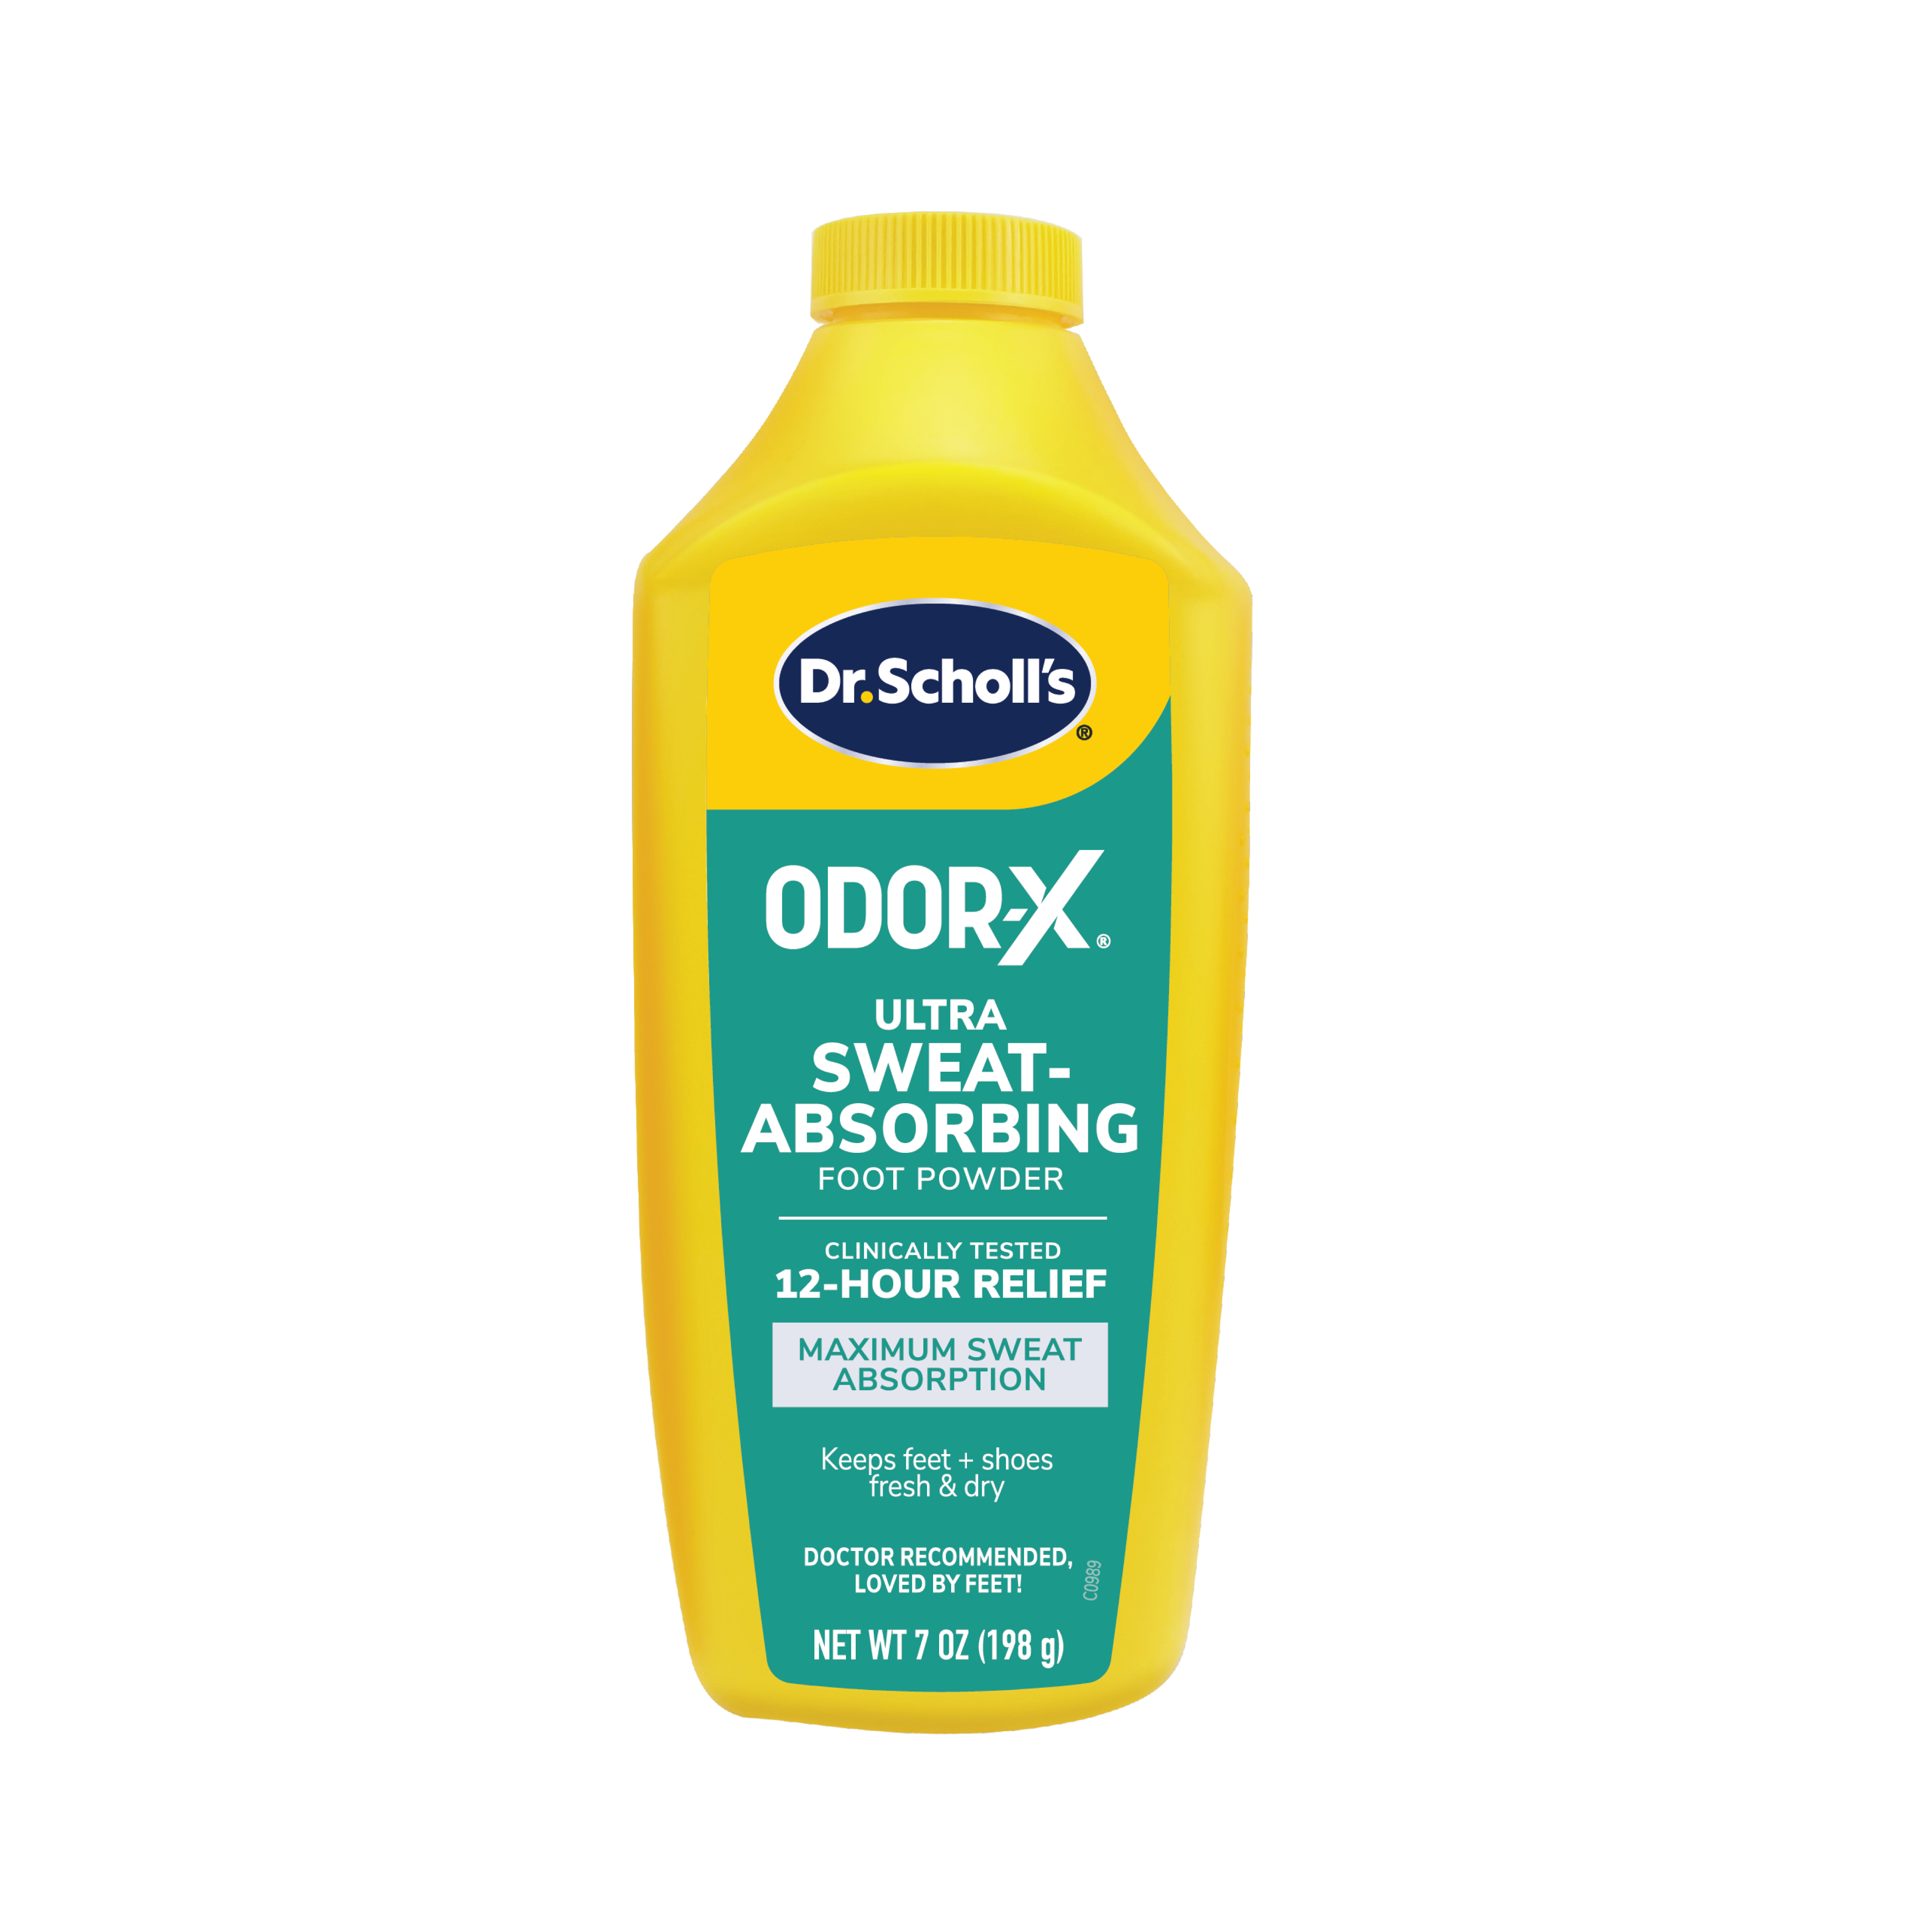 Dr. Scholl’s® Odor-X® Ultra Sweat-Absorbing Foot Powder (7oz) for Maximum Sweat Absorption - image 1 of 9